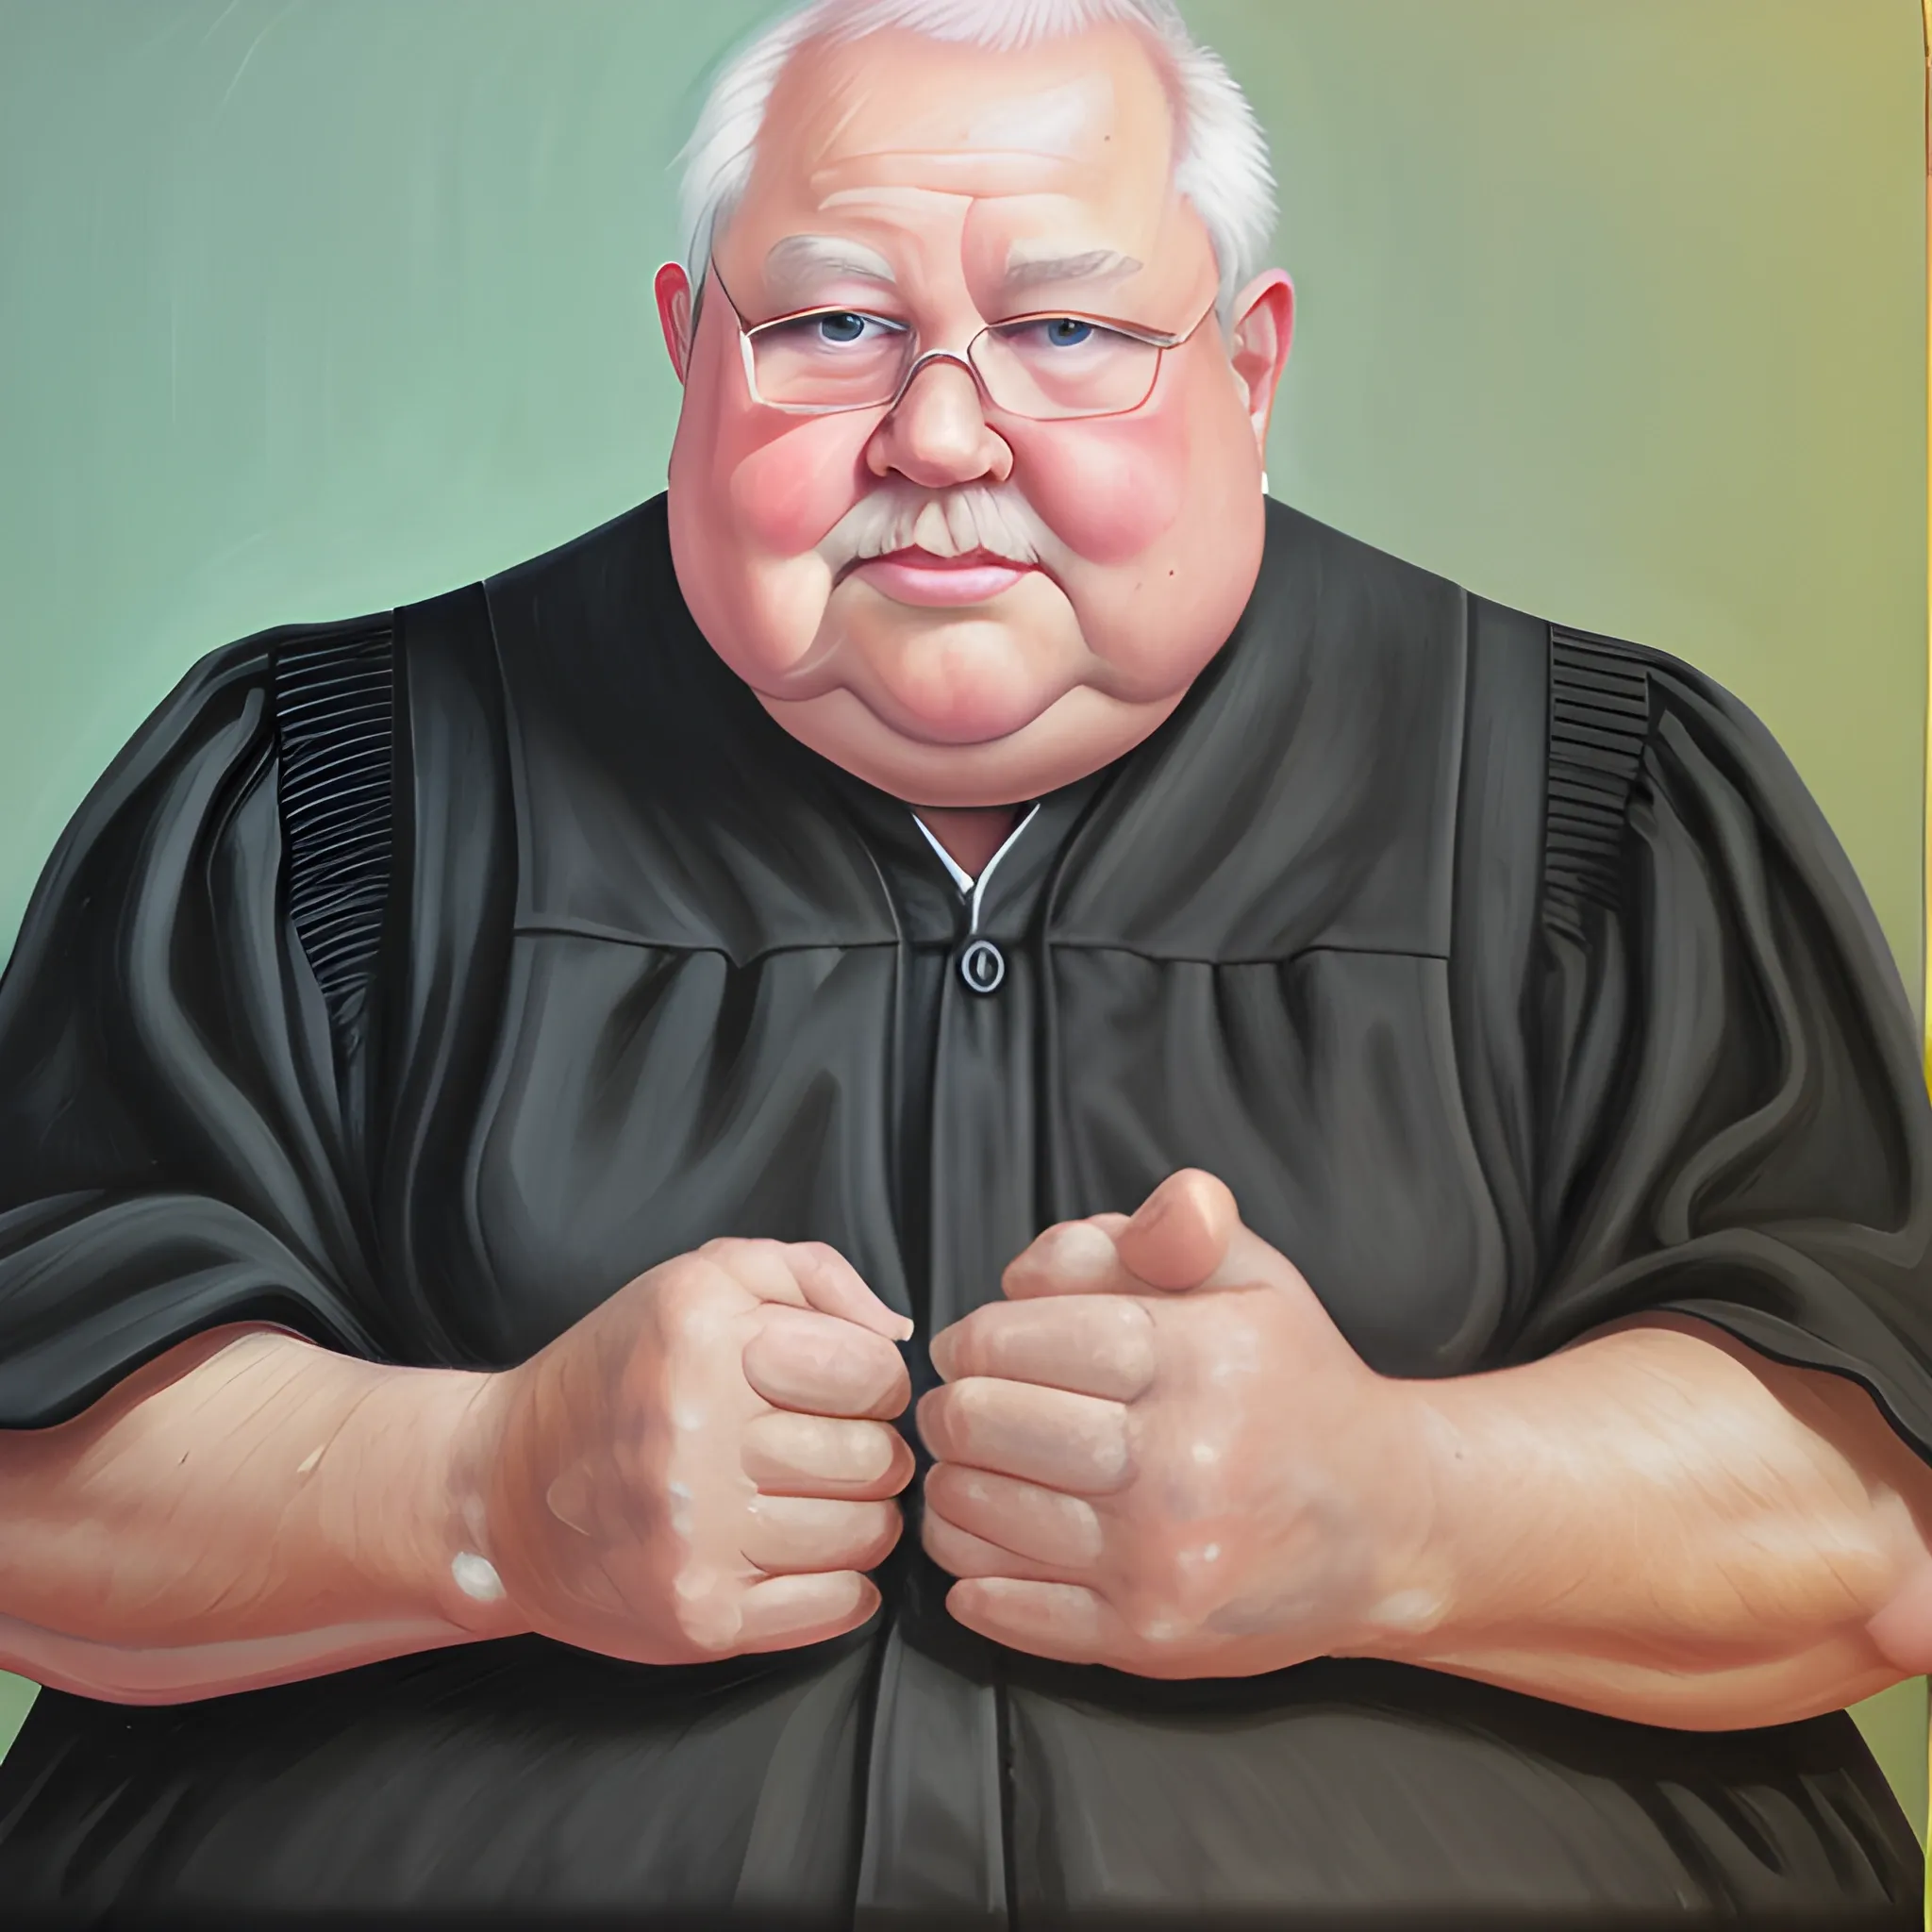 Man 70 years old fat, str8ct judge, Oil Painting